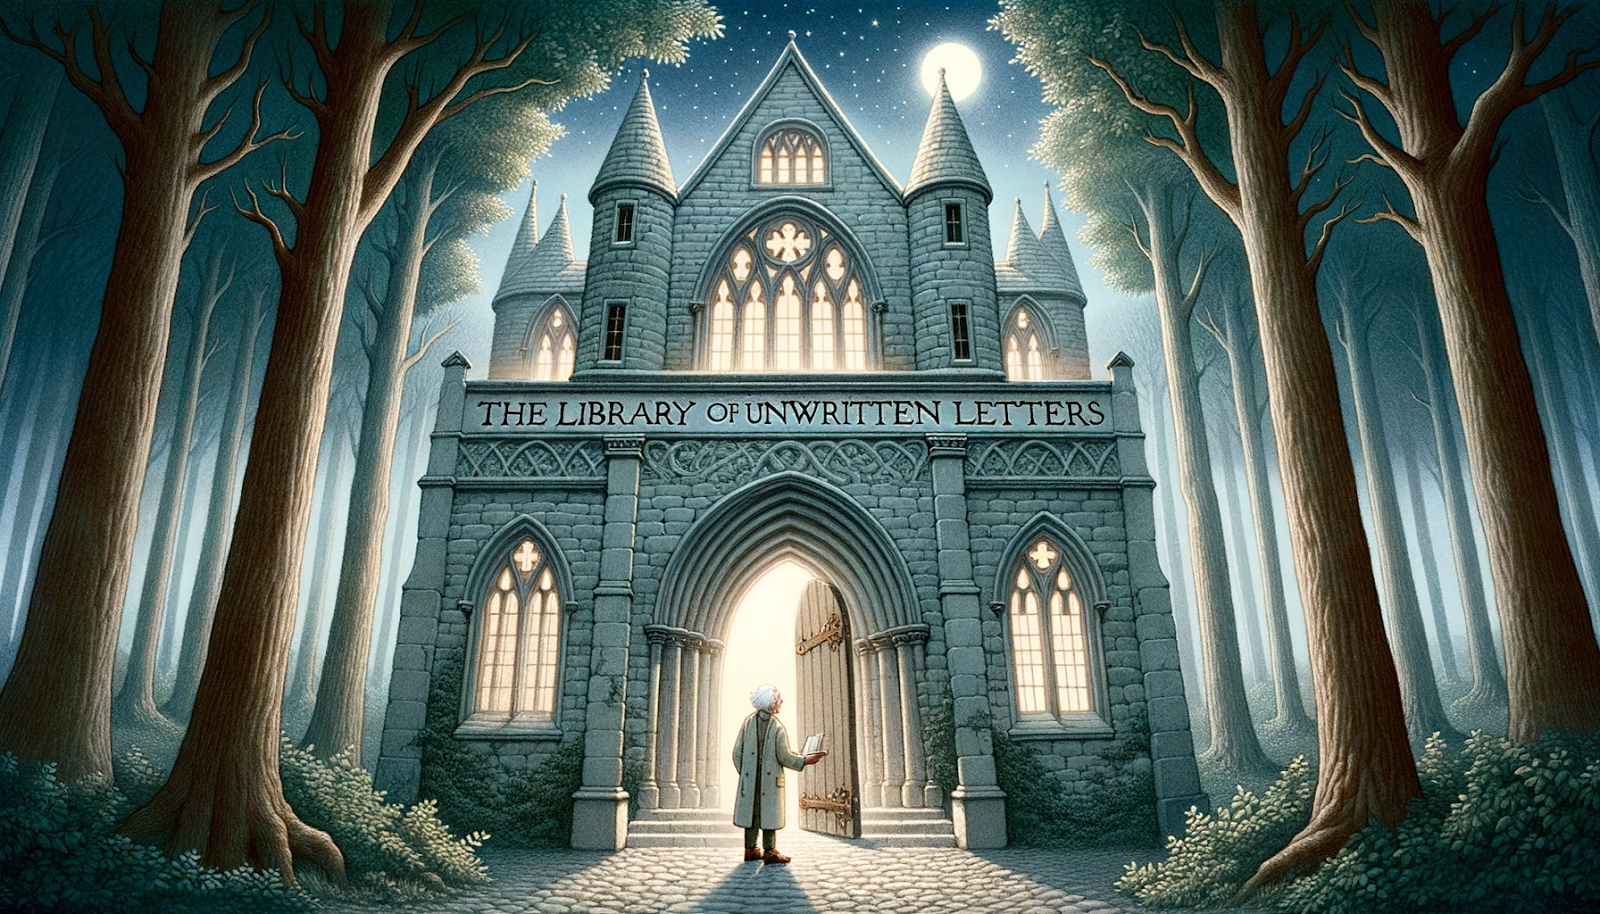 Illustration of a grand building made of ancient stone, illuminated by soft moonlight in a forest clearing. Above the entrance archway, the words 'The Library of Unwritten Letters' are engraved. An elderly man, Alistair, with white hair and wise eyes, stands by the doorway, greeting Erin and Mia.